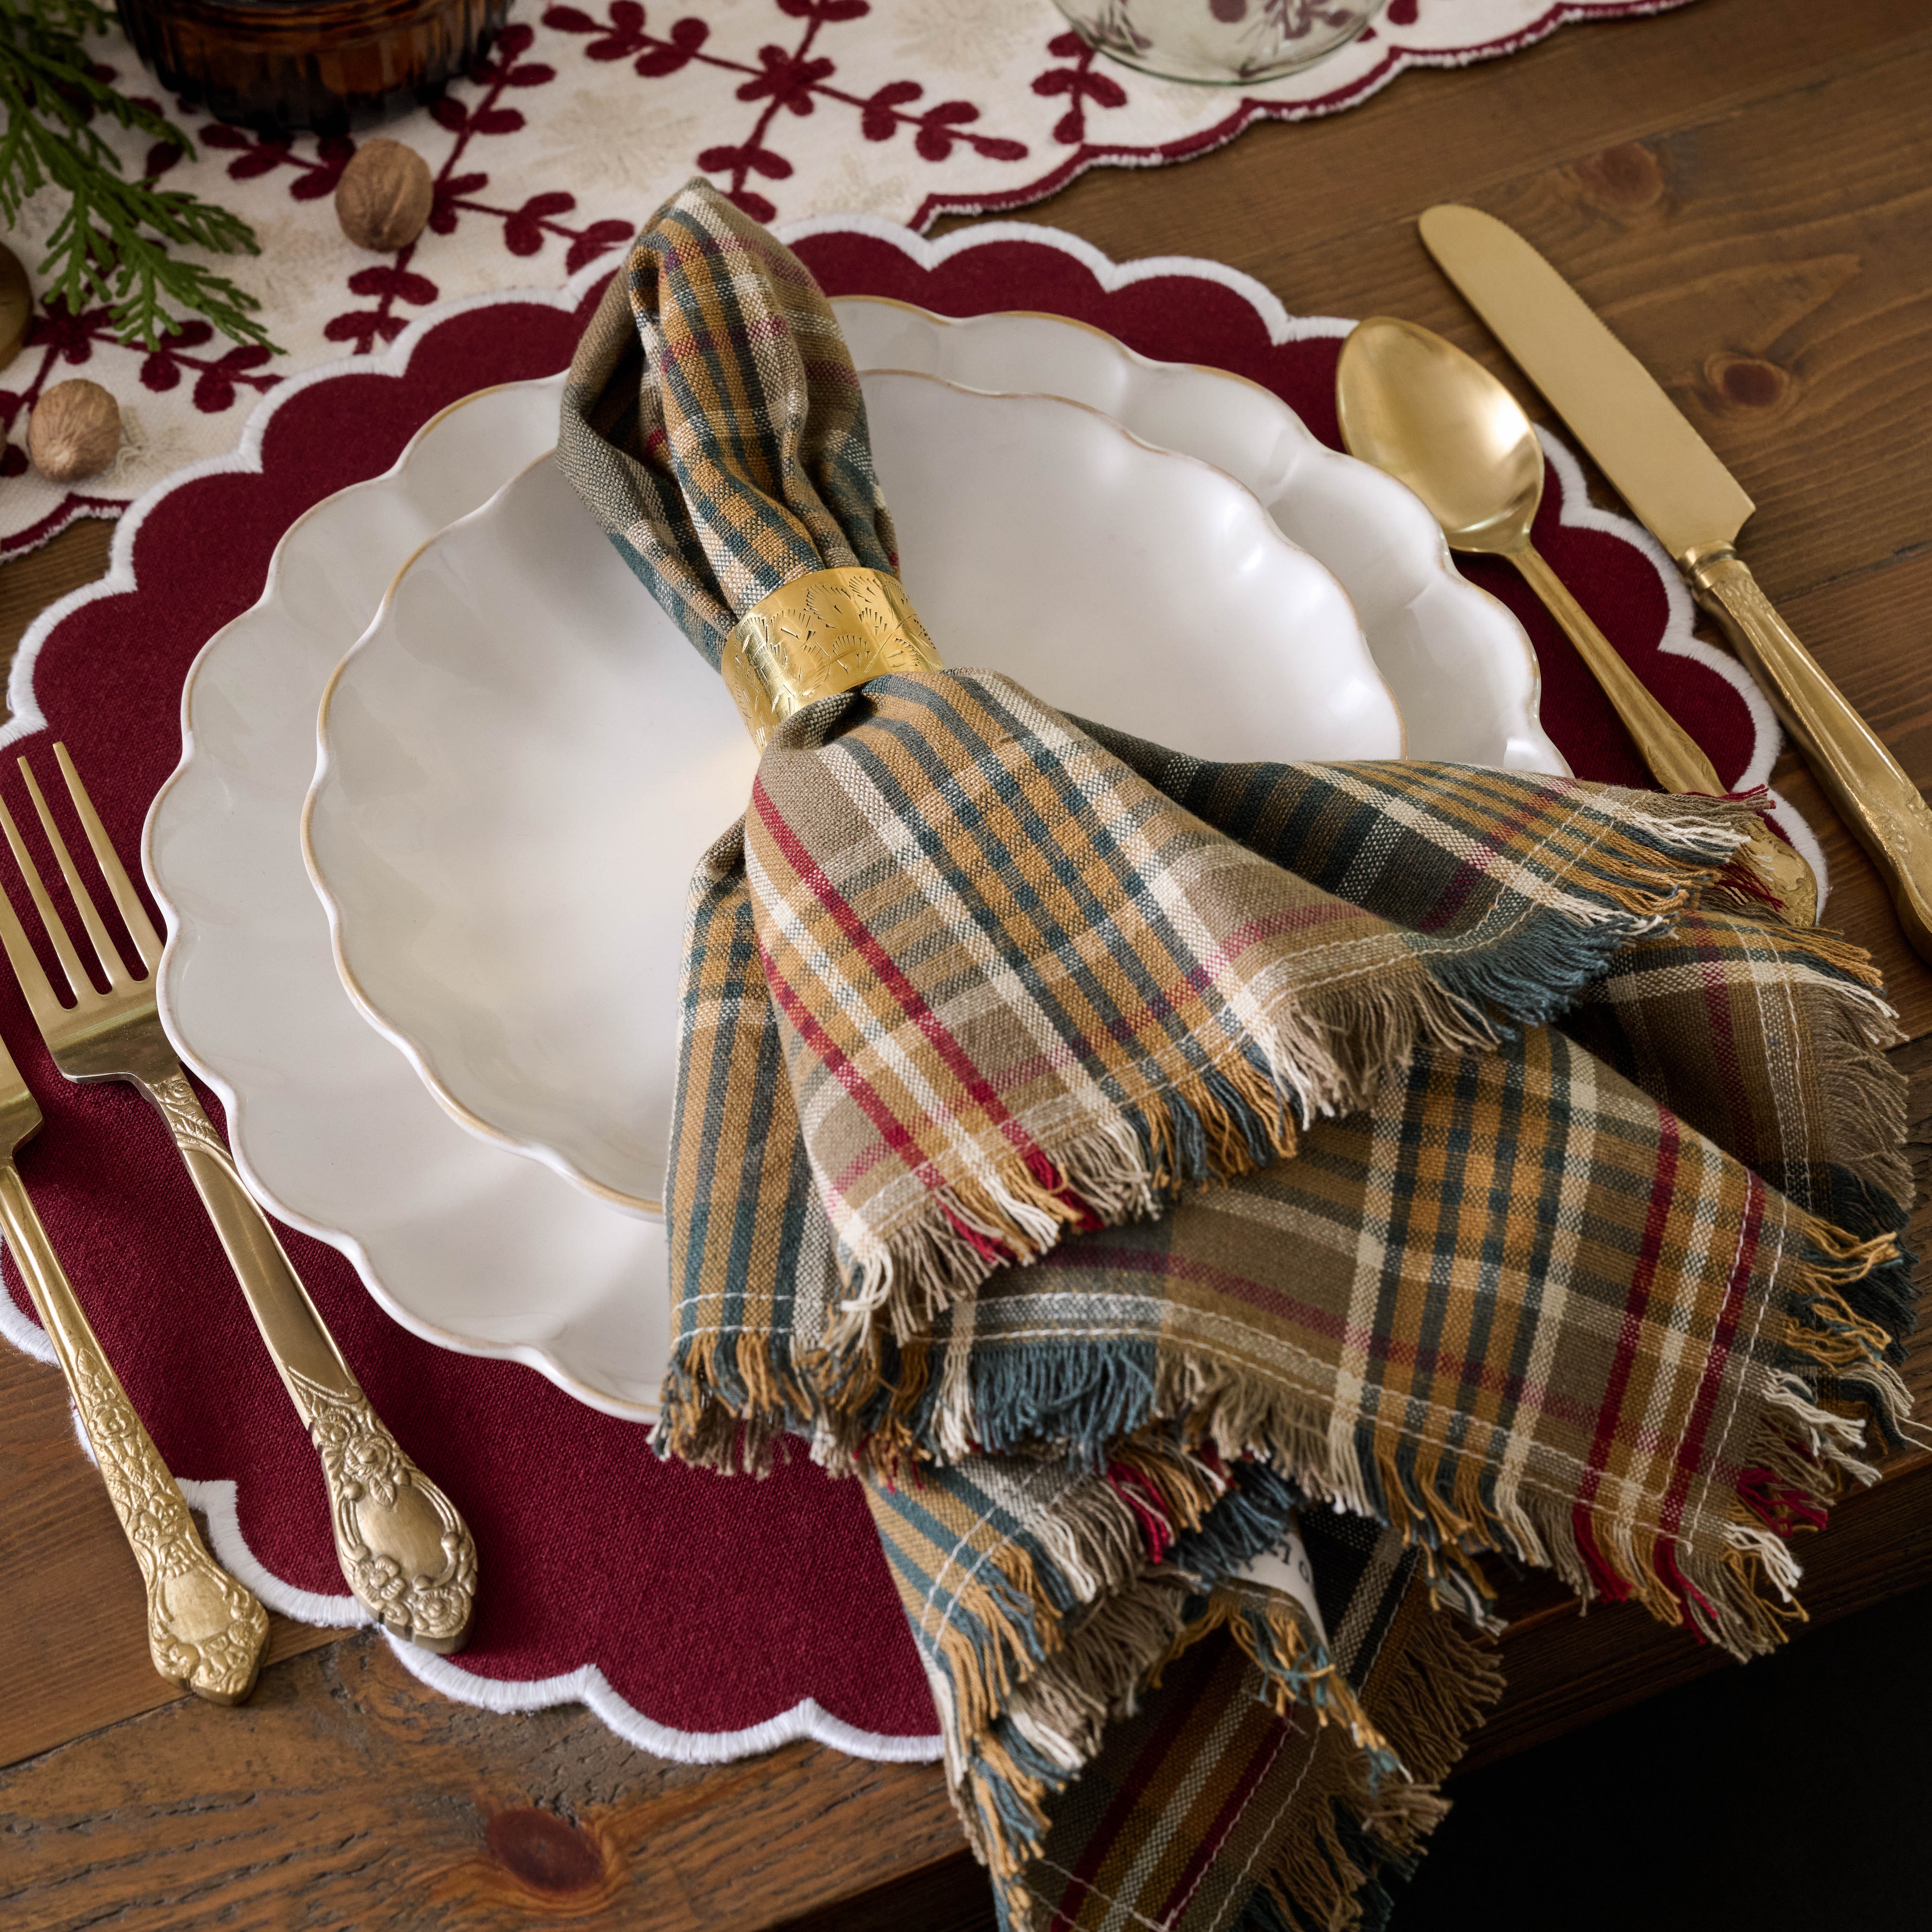 holiday table setting with placemat and plates